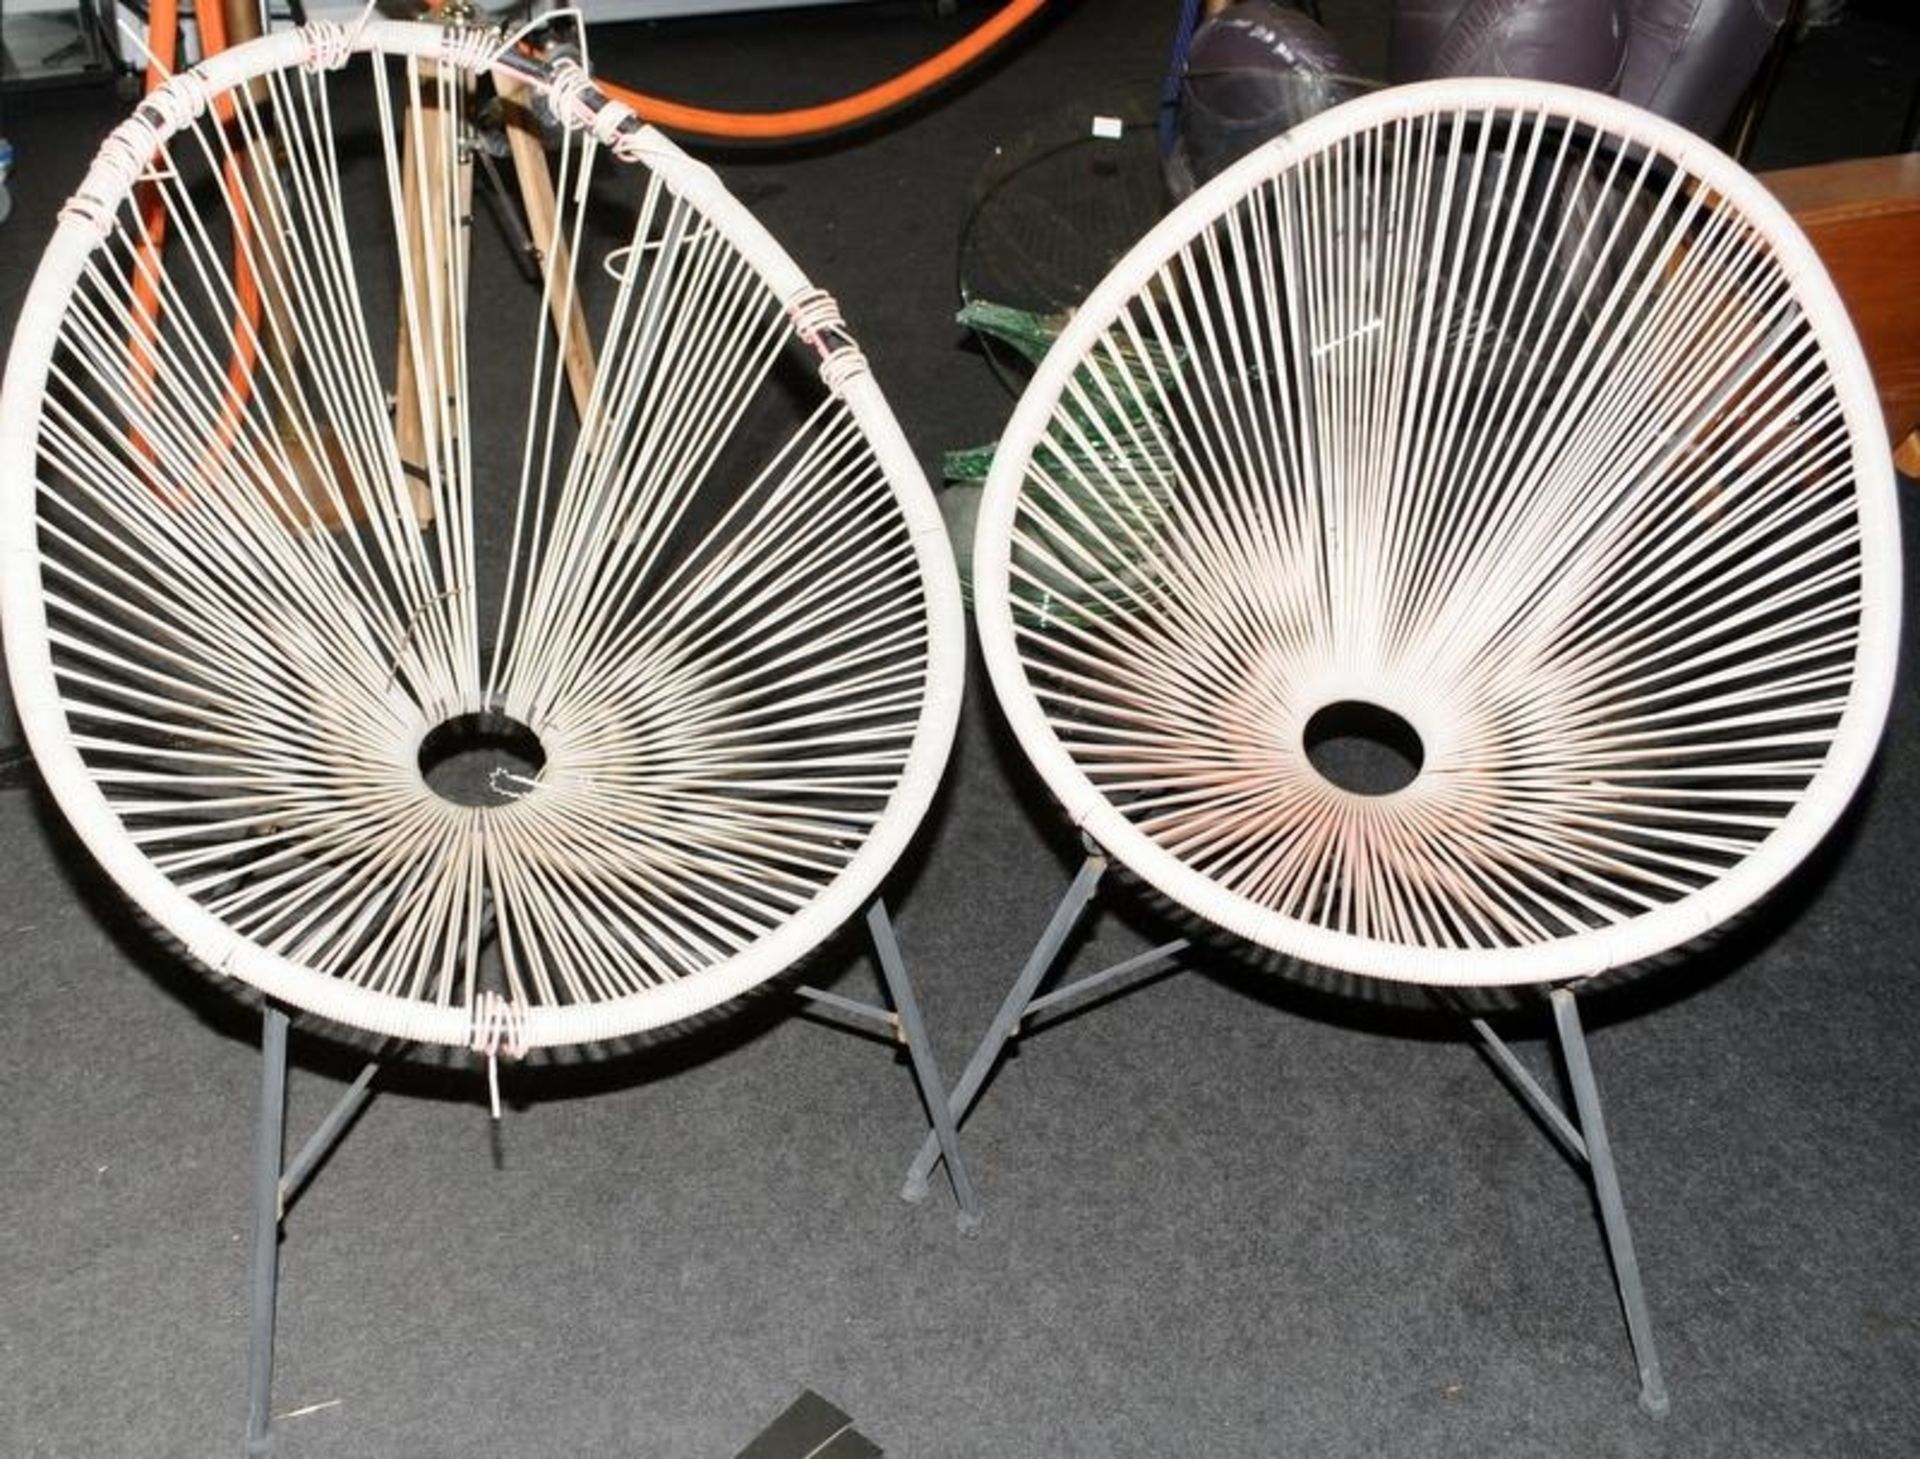 A pair of wire work armchairs.